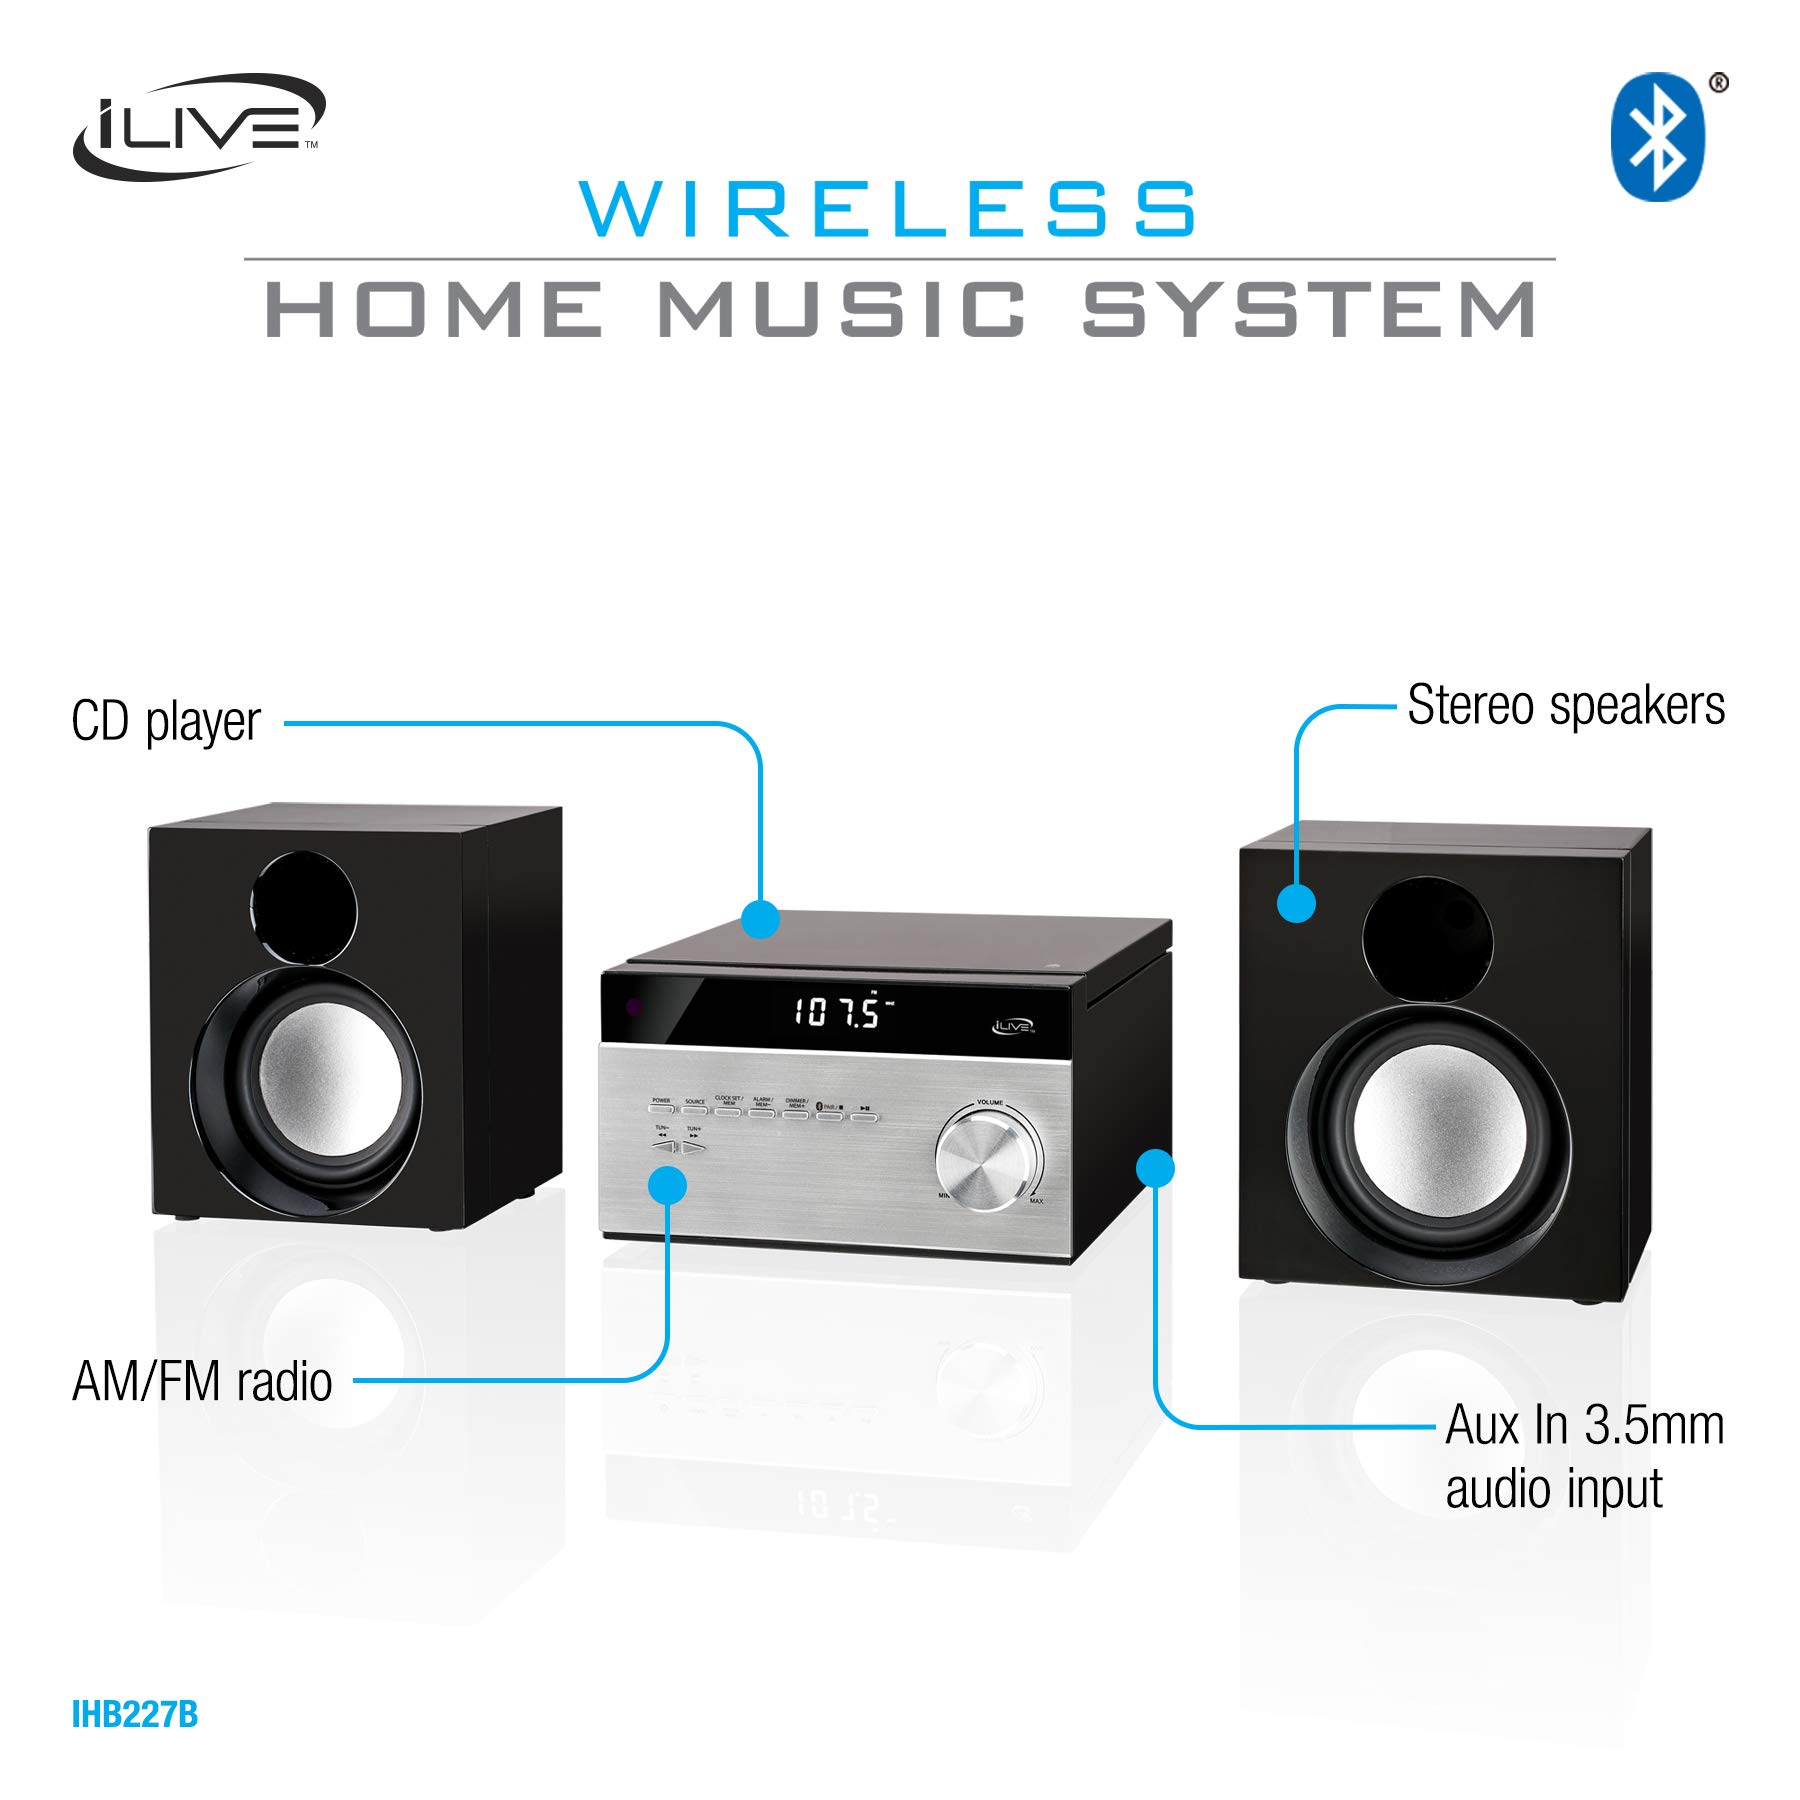 iLive Wireless Home Stereo System, with CD Player and AM/FM Radio, Includes Remote Control (iHB227B),Black/Silver